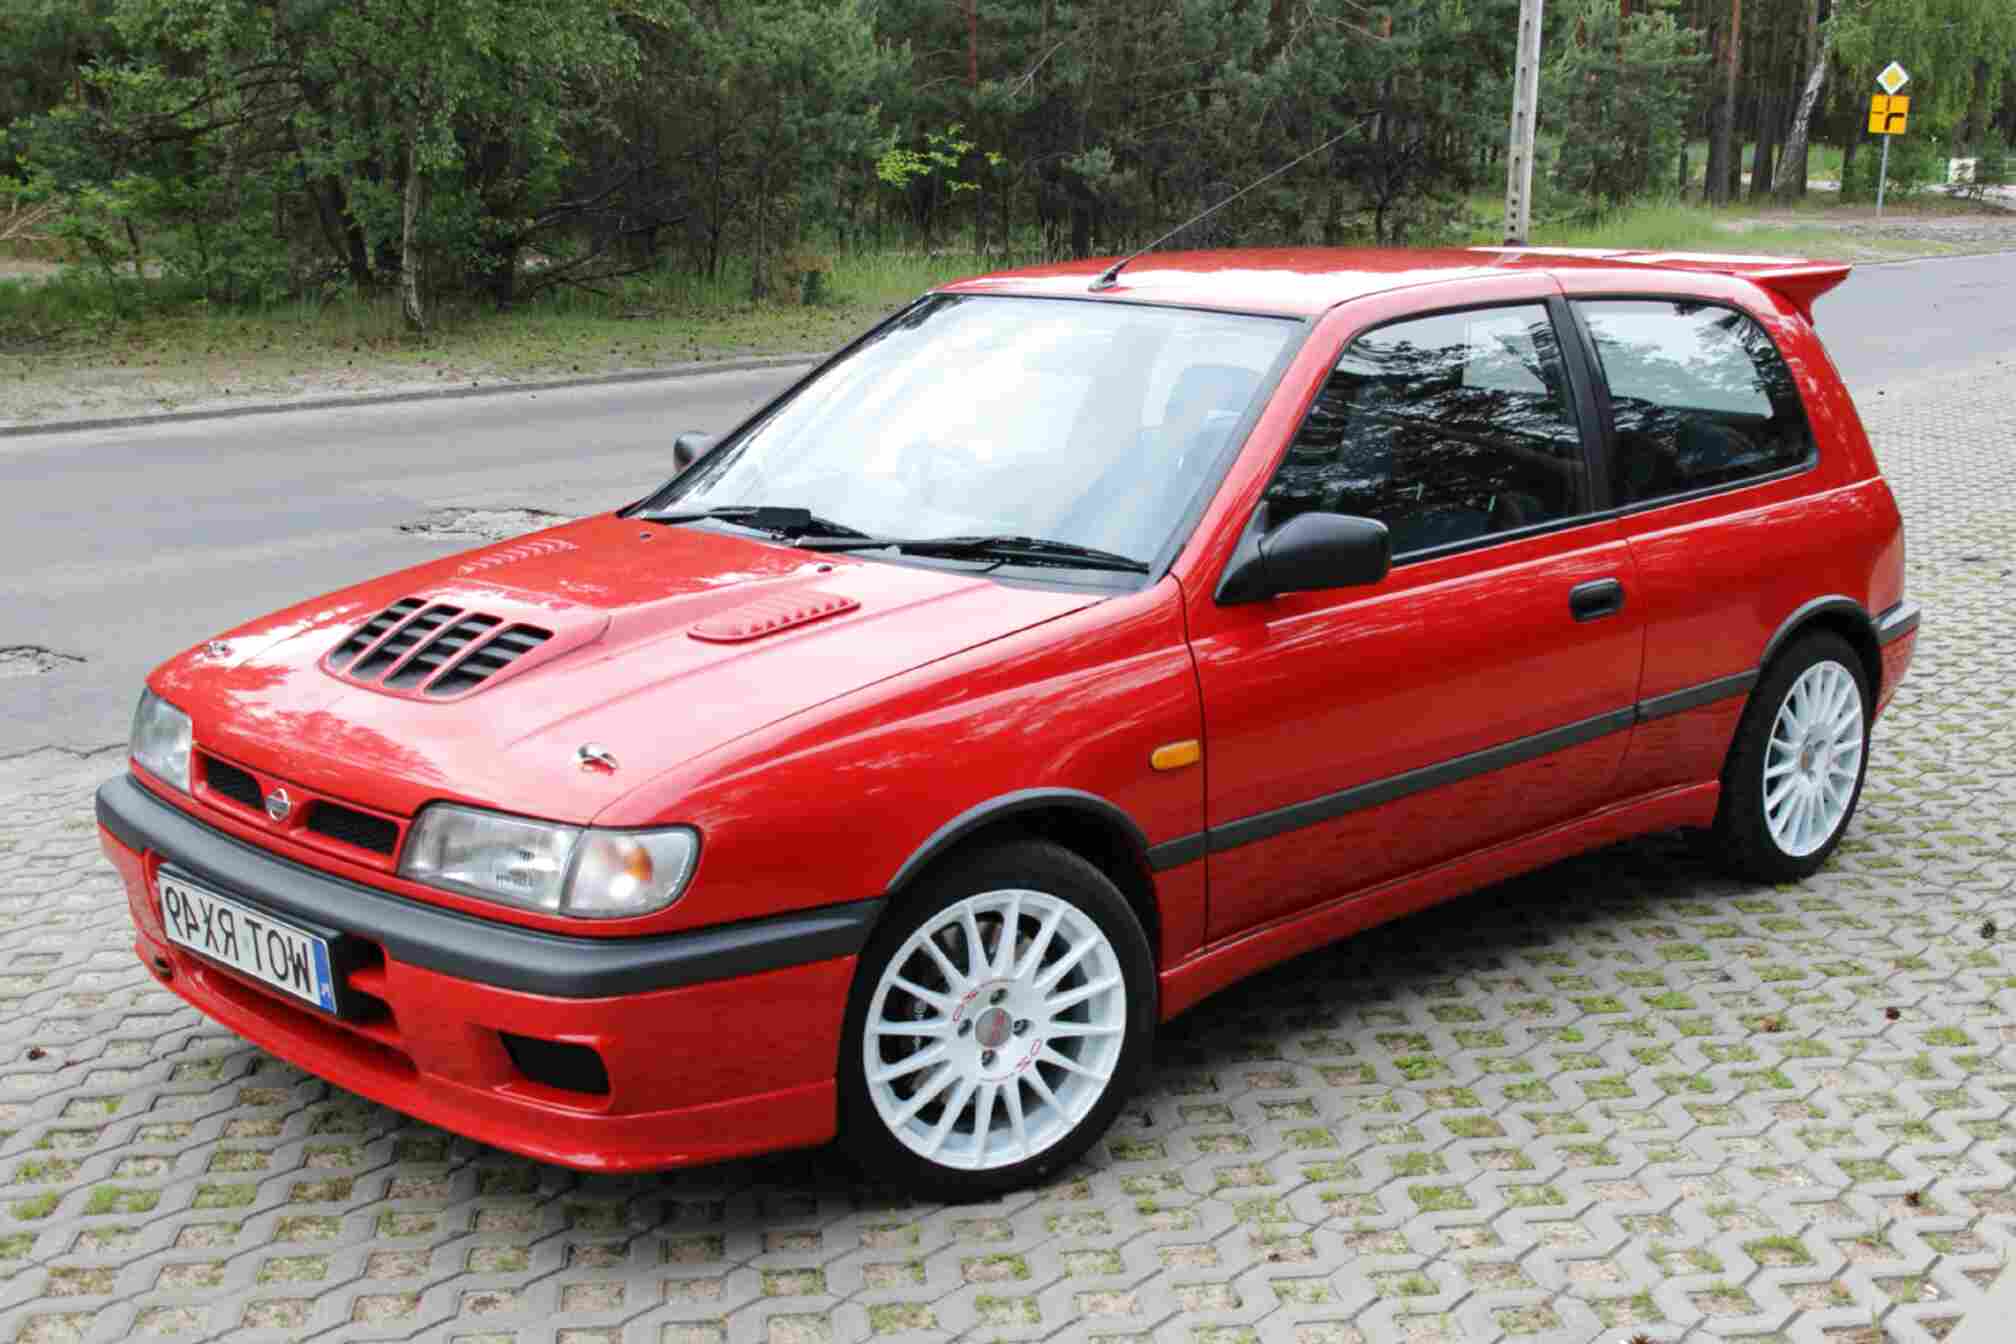 Nissan Sunny Gti for sale in UK | 55 used Nissan Sunny Gtis